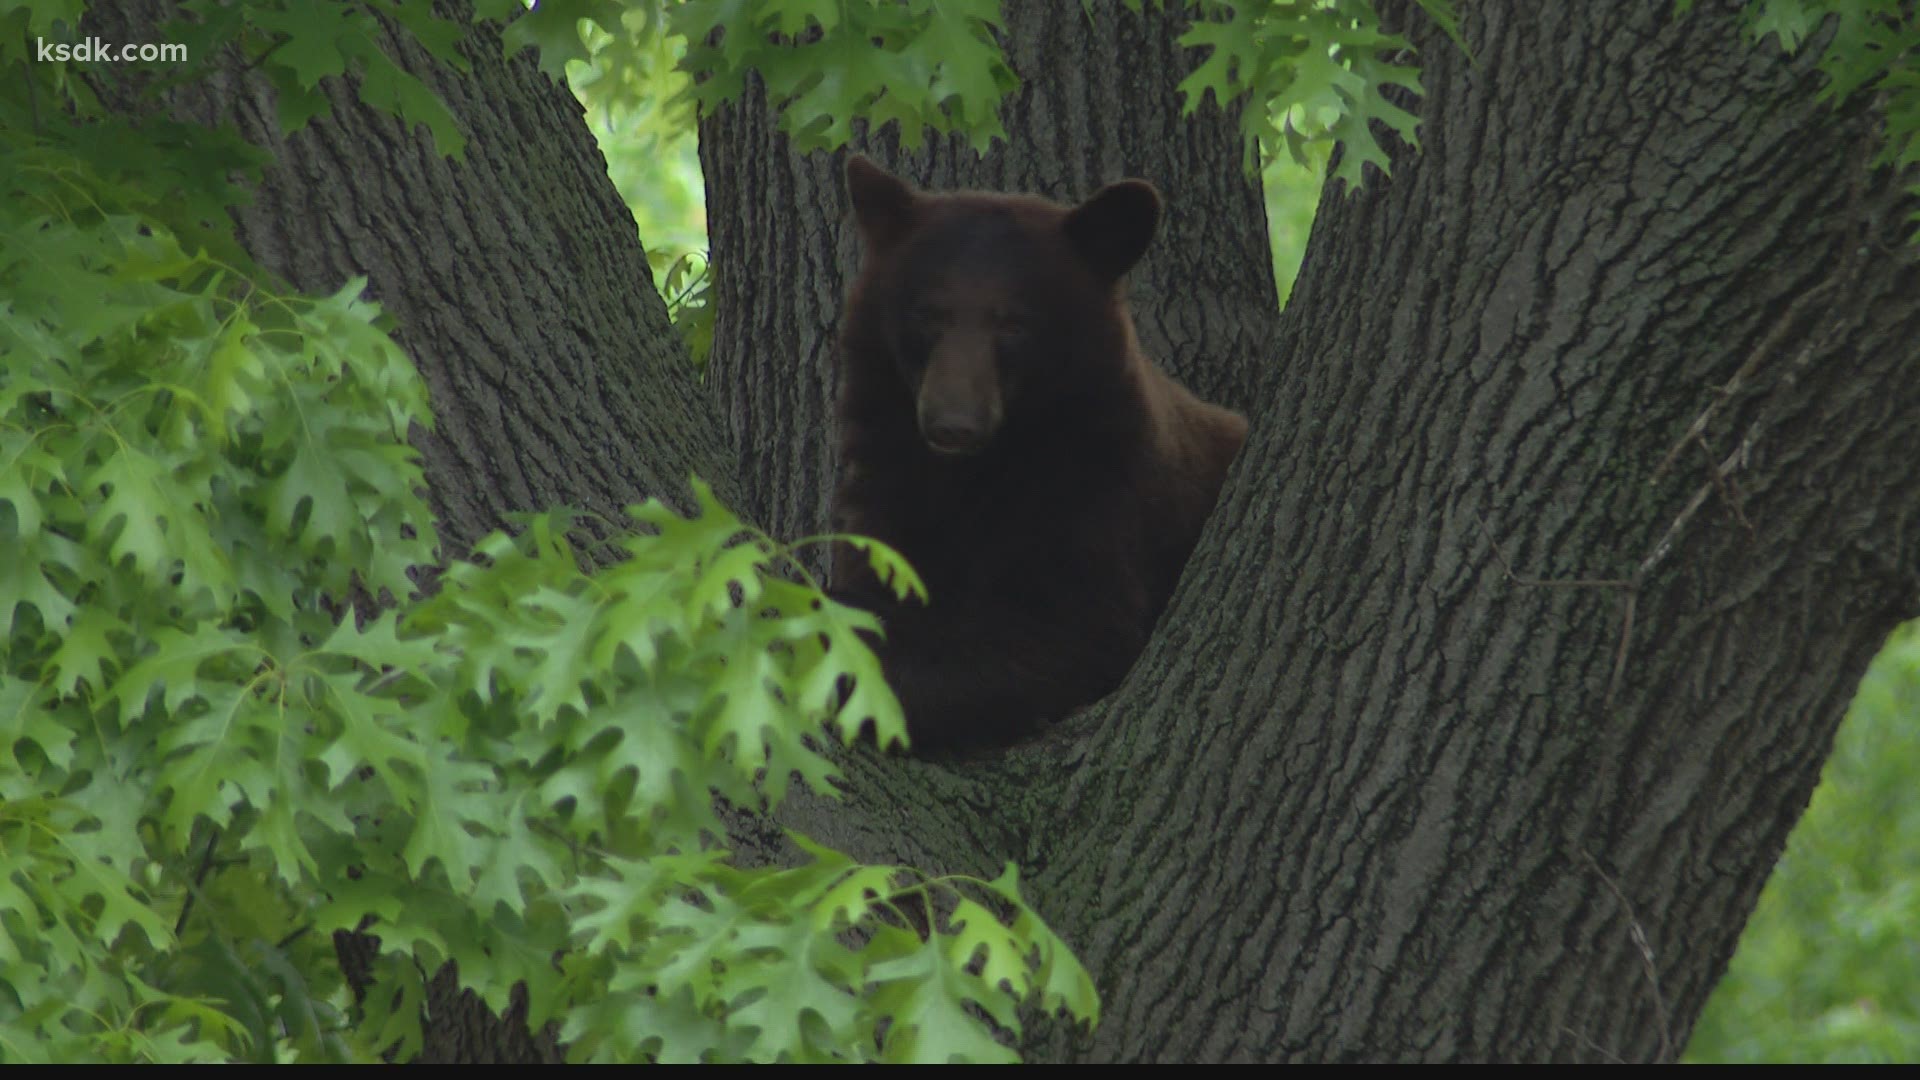 Conservation agents tranquilize black bear in Richmond Heights